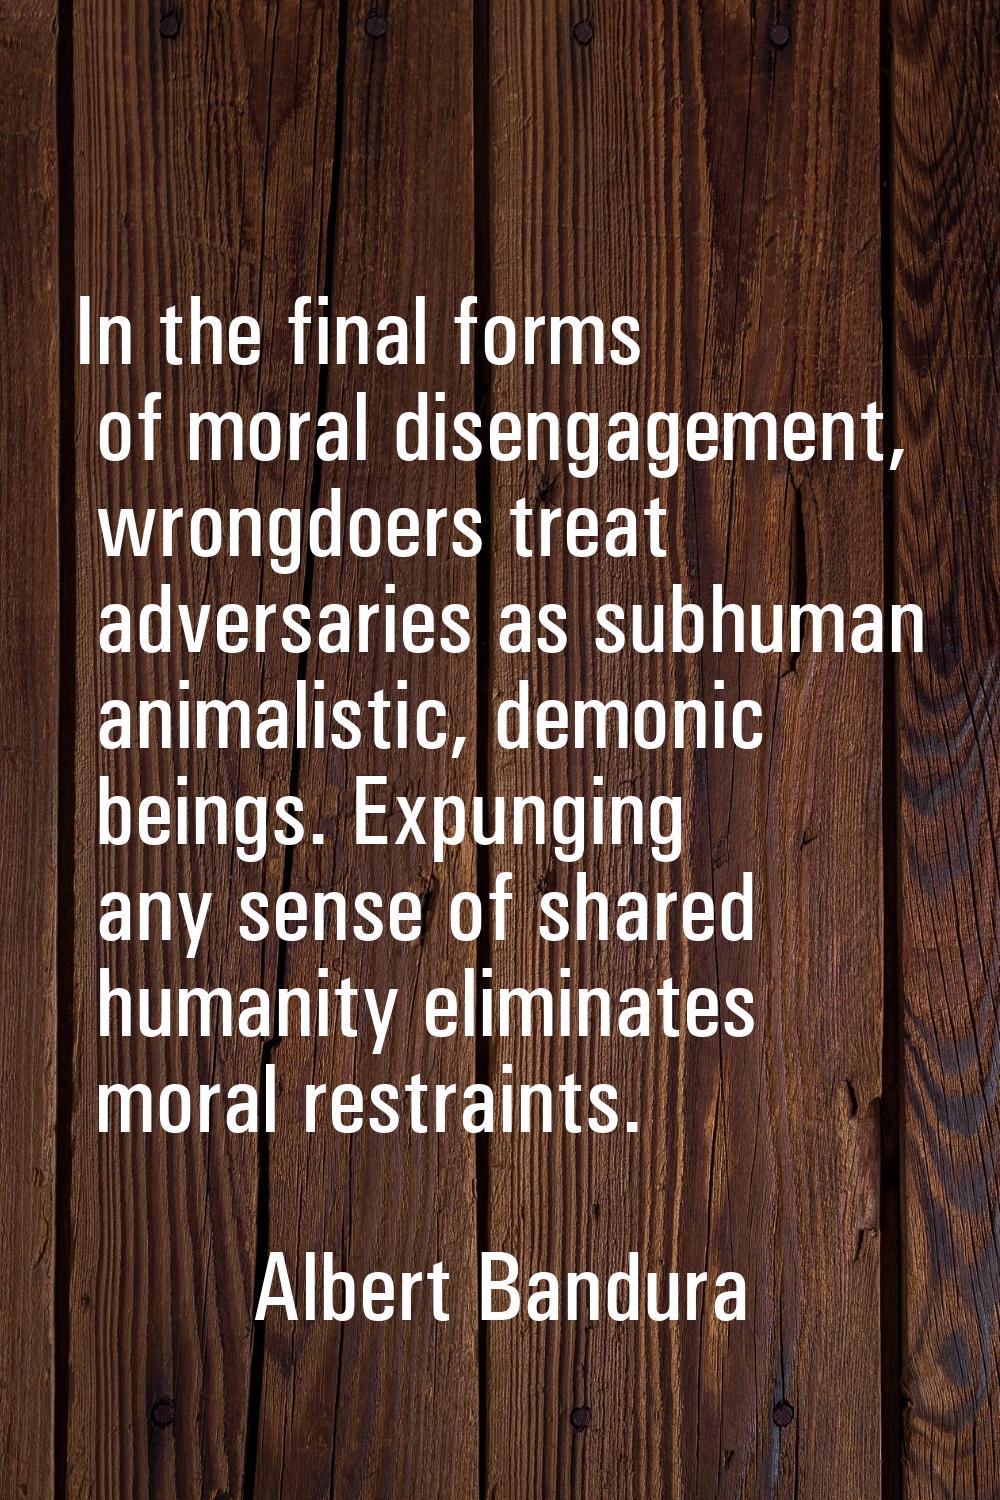 In the final forms of moral disengagement, wrongdoers treat adversaries as subhuman animalistic, de